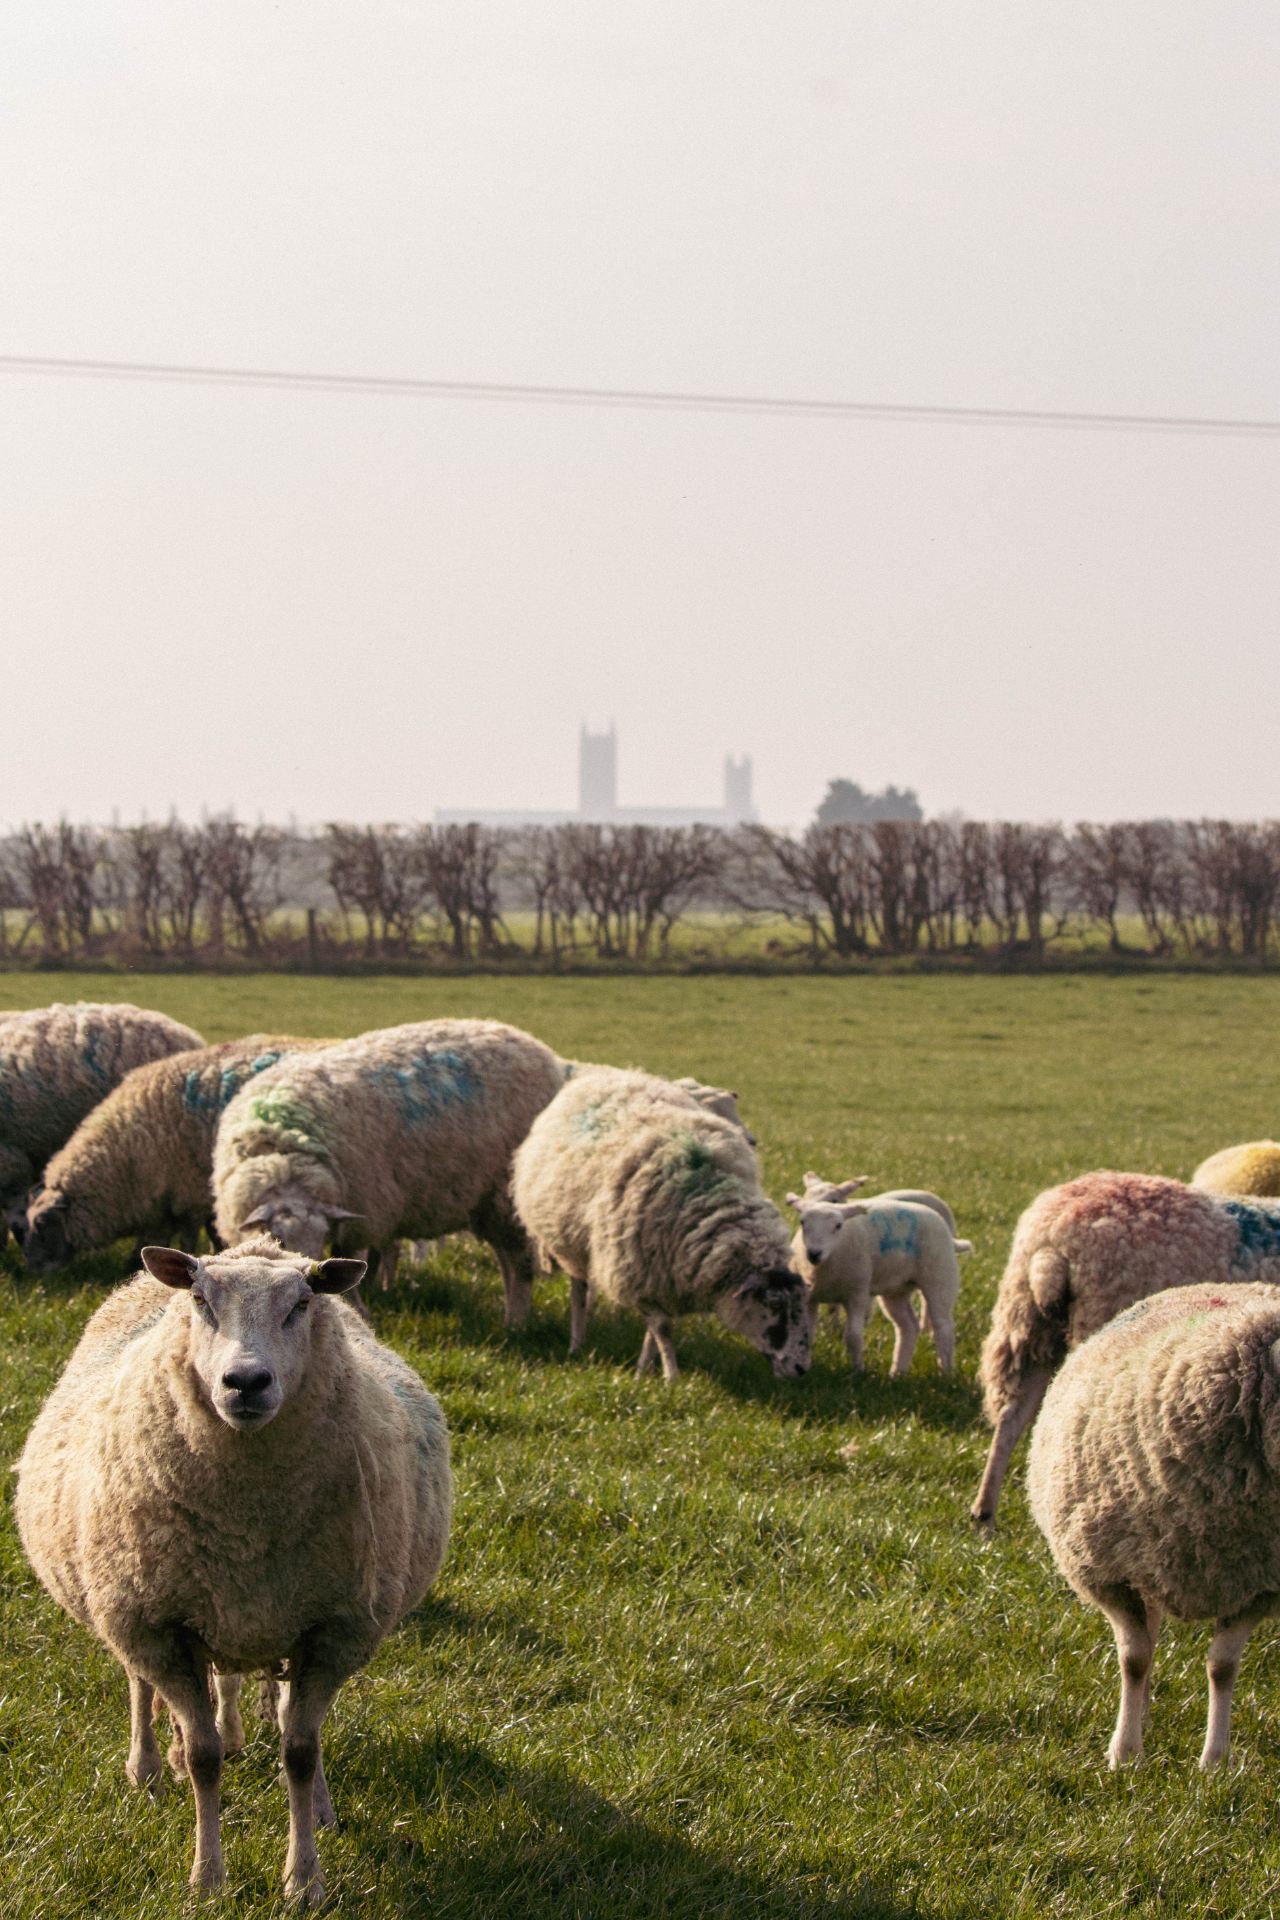 Image of sheep in a field